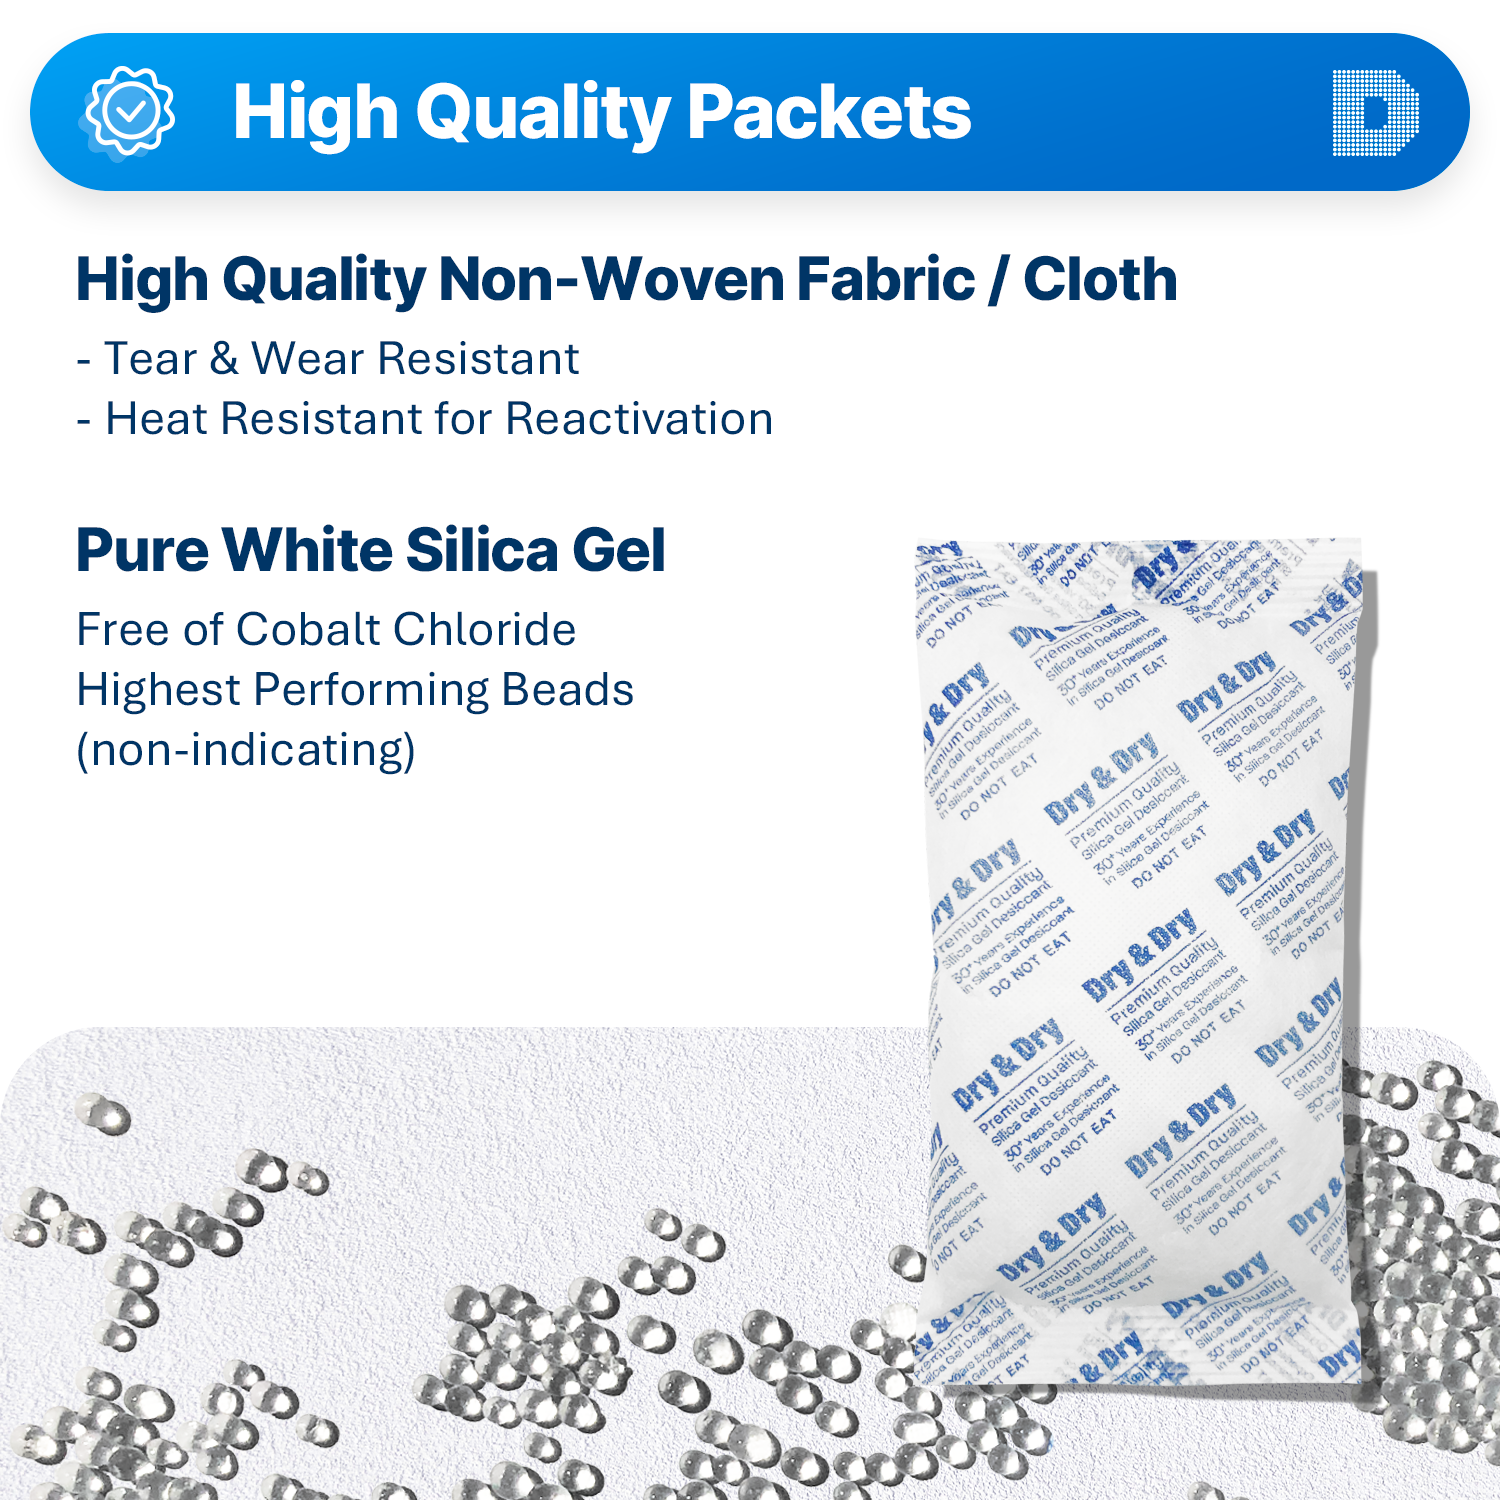 300 Gram [60 Packets]  "Dry & Dry" Premium Pure & Safe Silica Gel Desiccant Packets - Rechargeable Non-Woven Fabric (Cloth)